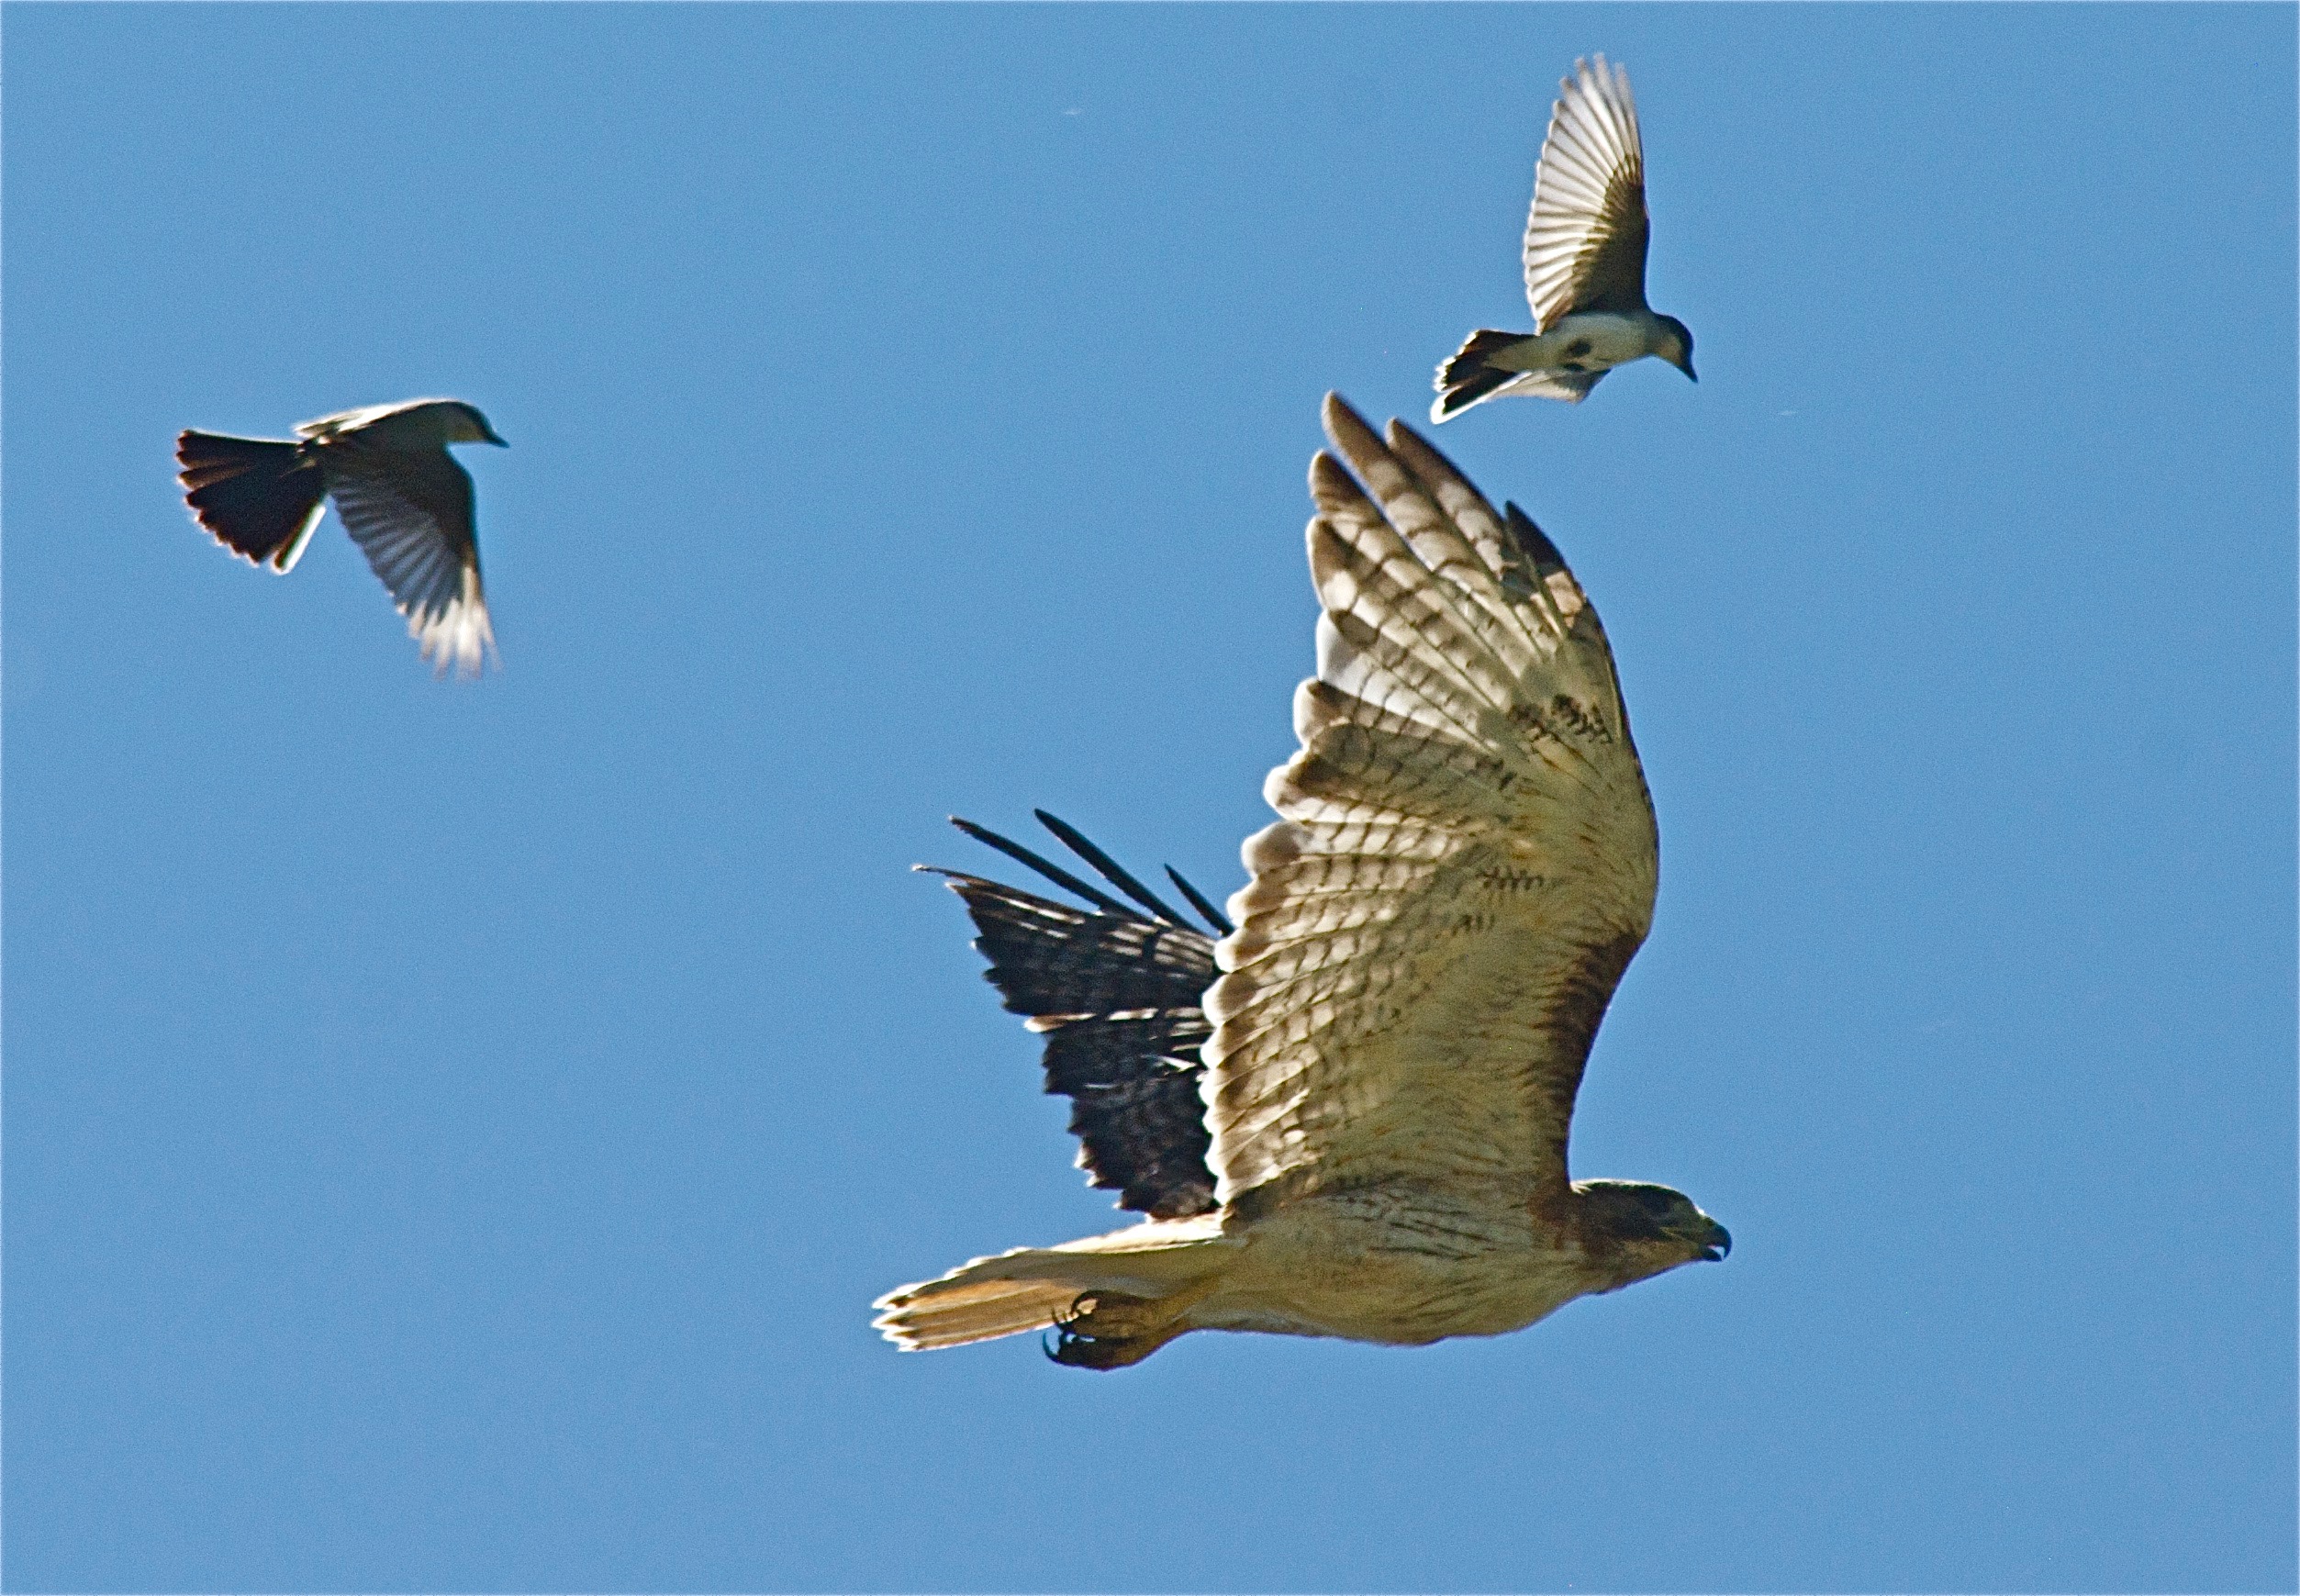 Red-Tailed Hawk pursued by Western Kingbirds